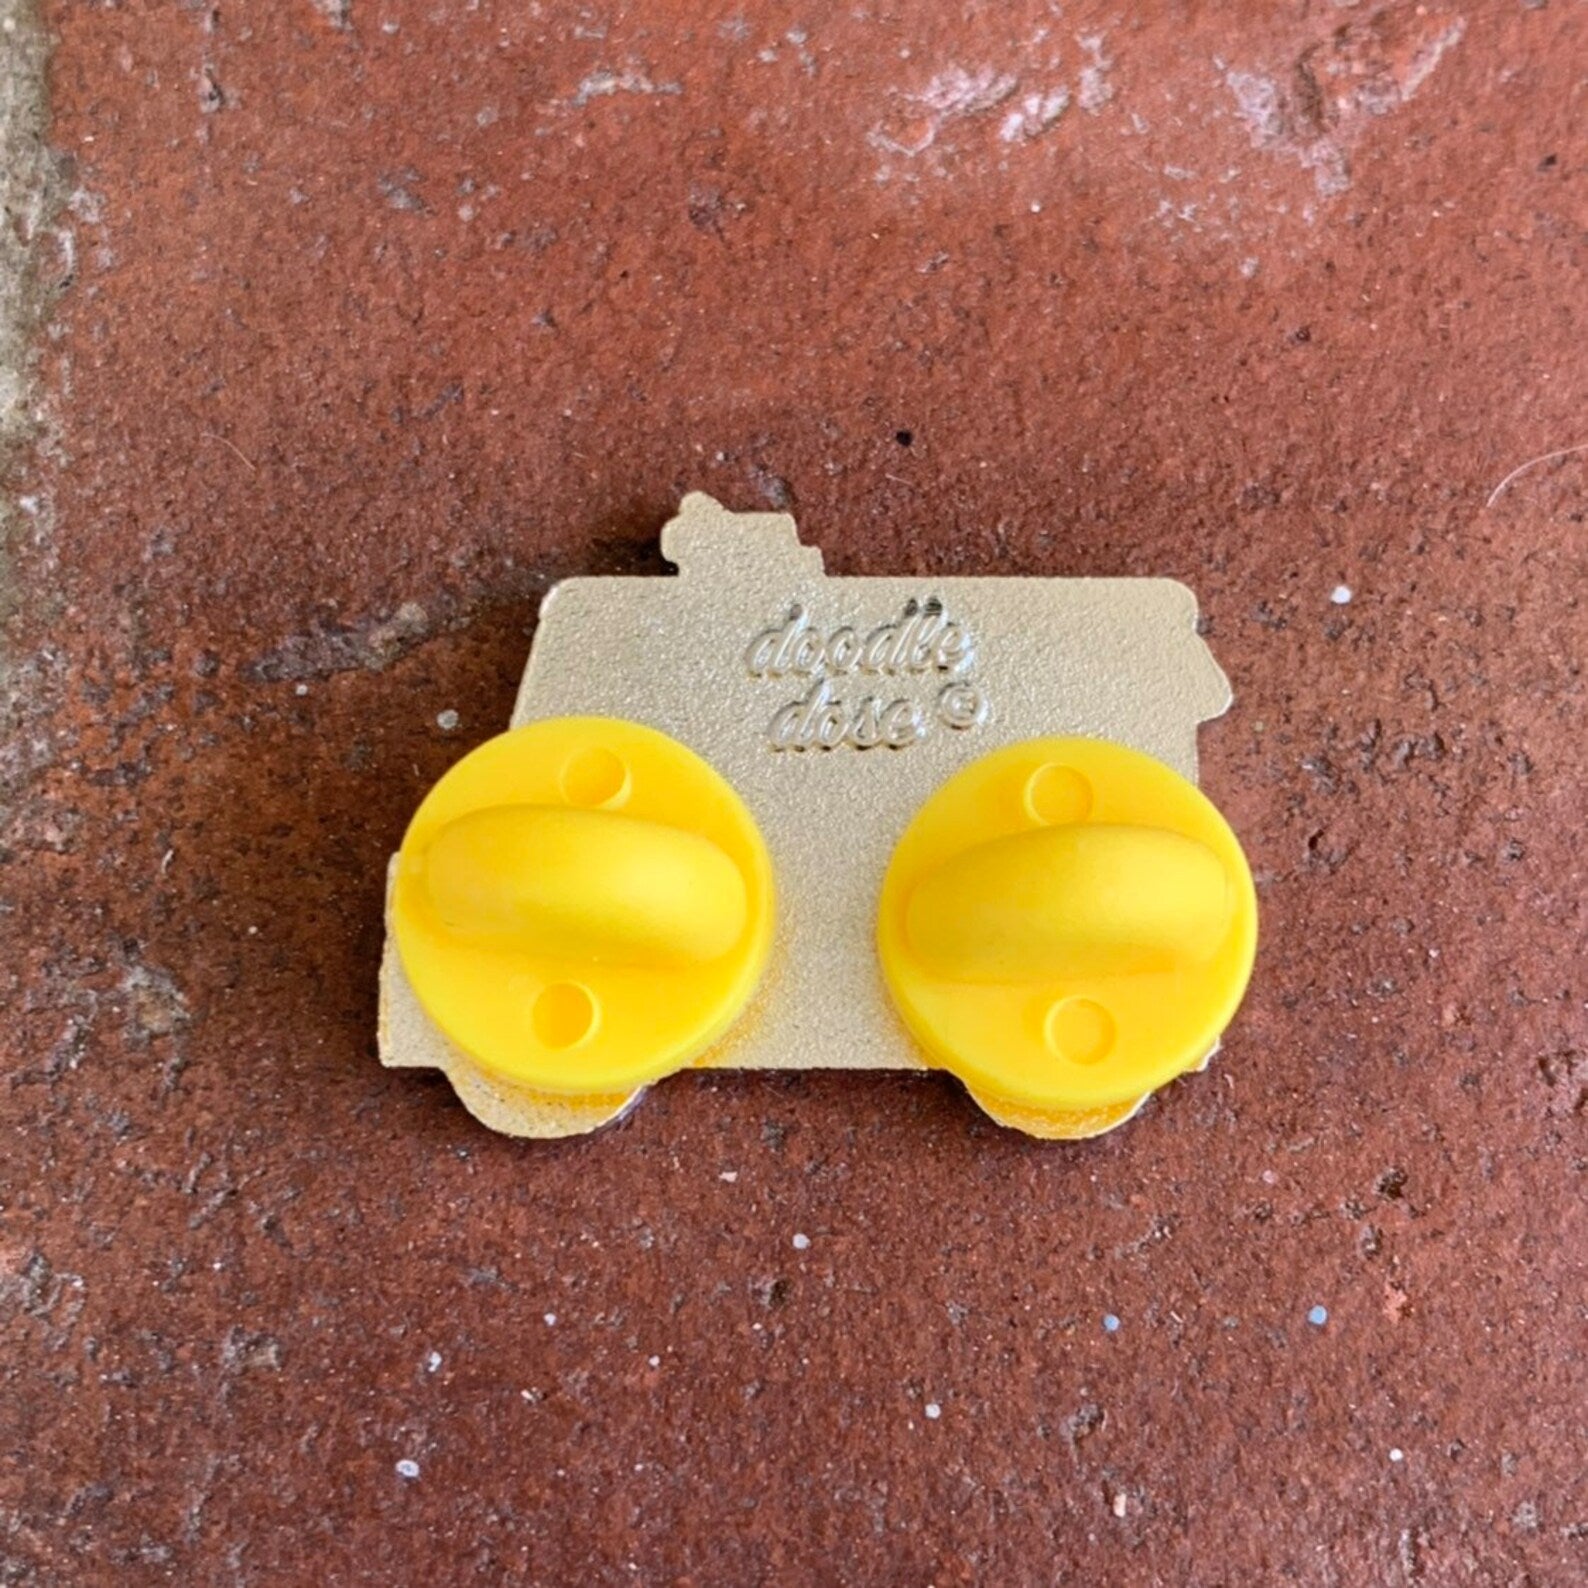 back of pin shows double rubber pin backs